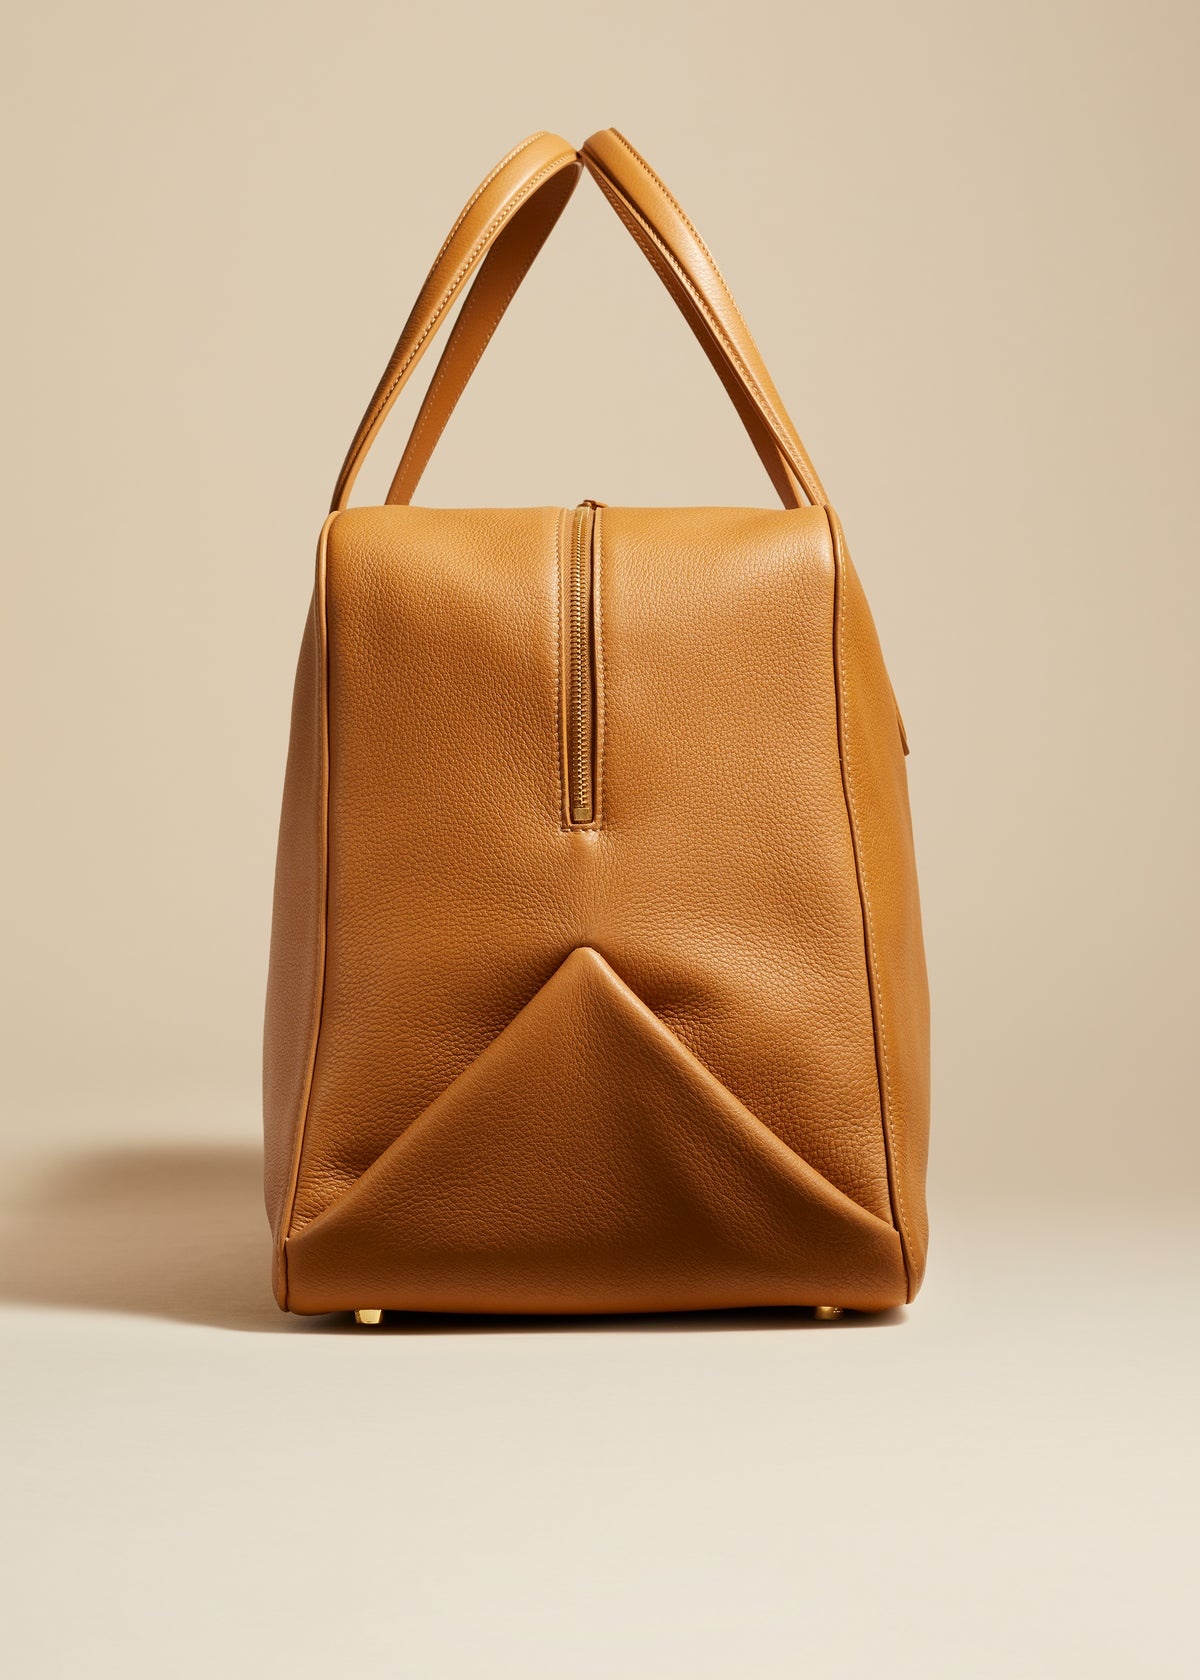 The Large Maeve Weekender Bag in Nougat Pebbled Leather - 3